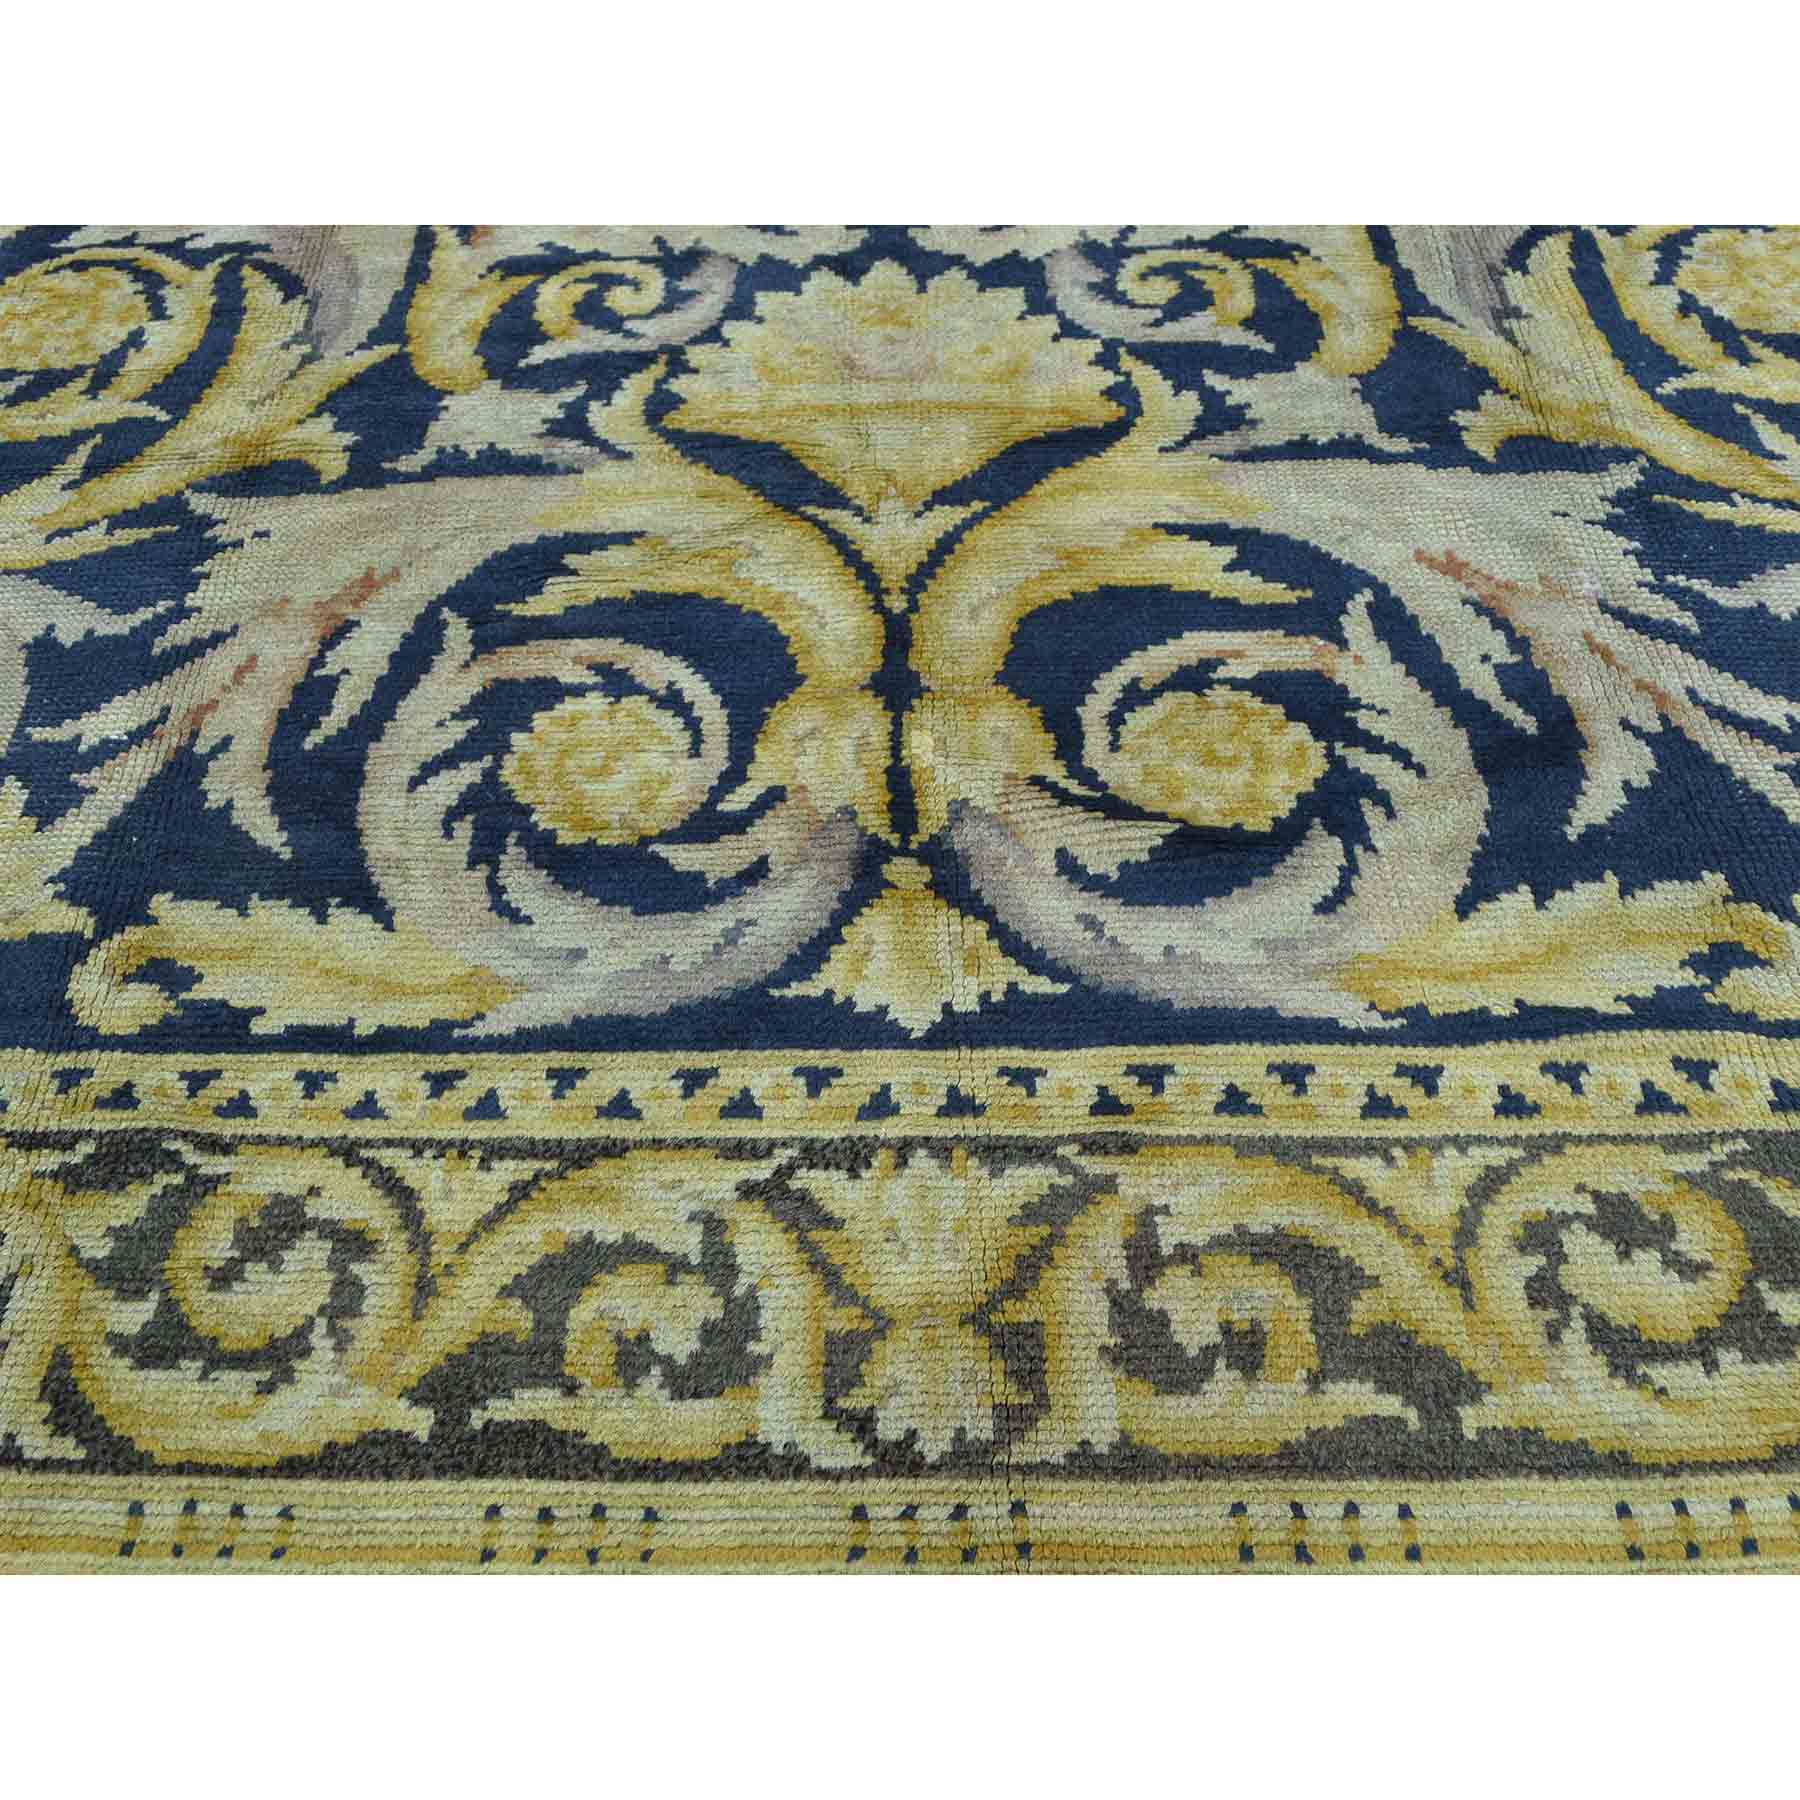 Antique-Hand-Knotted-Rug-172120